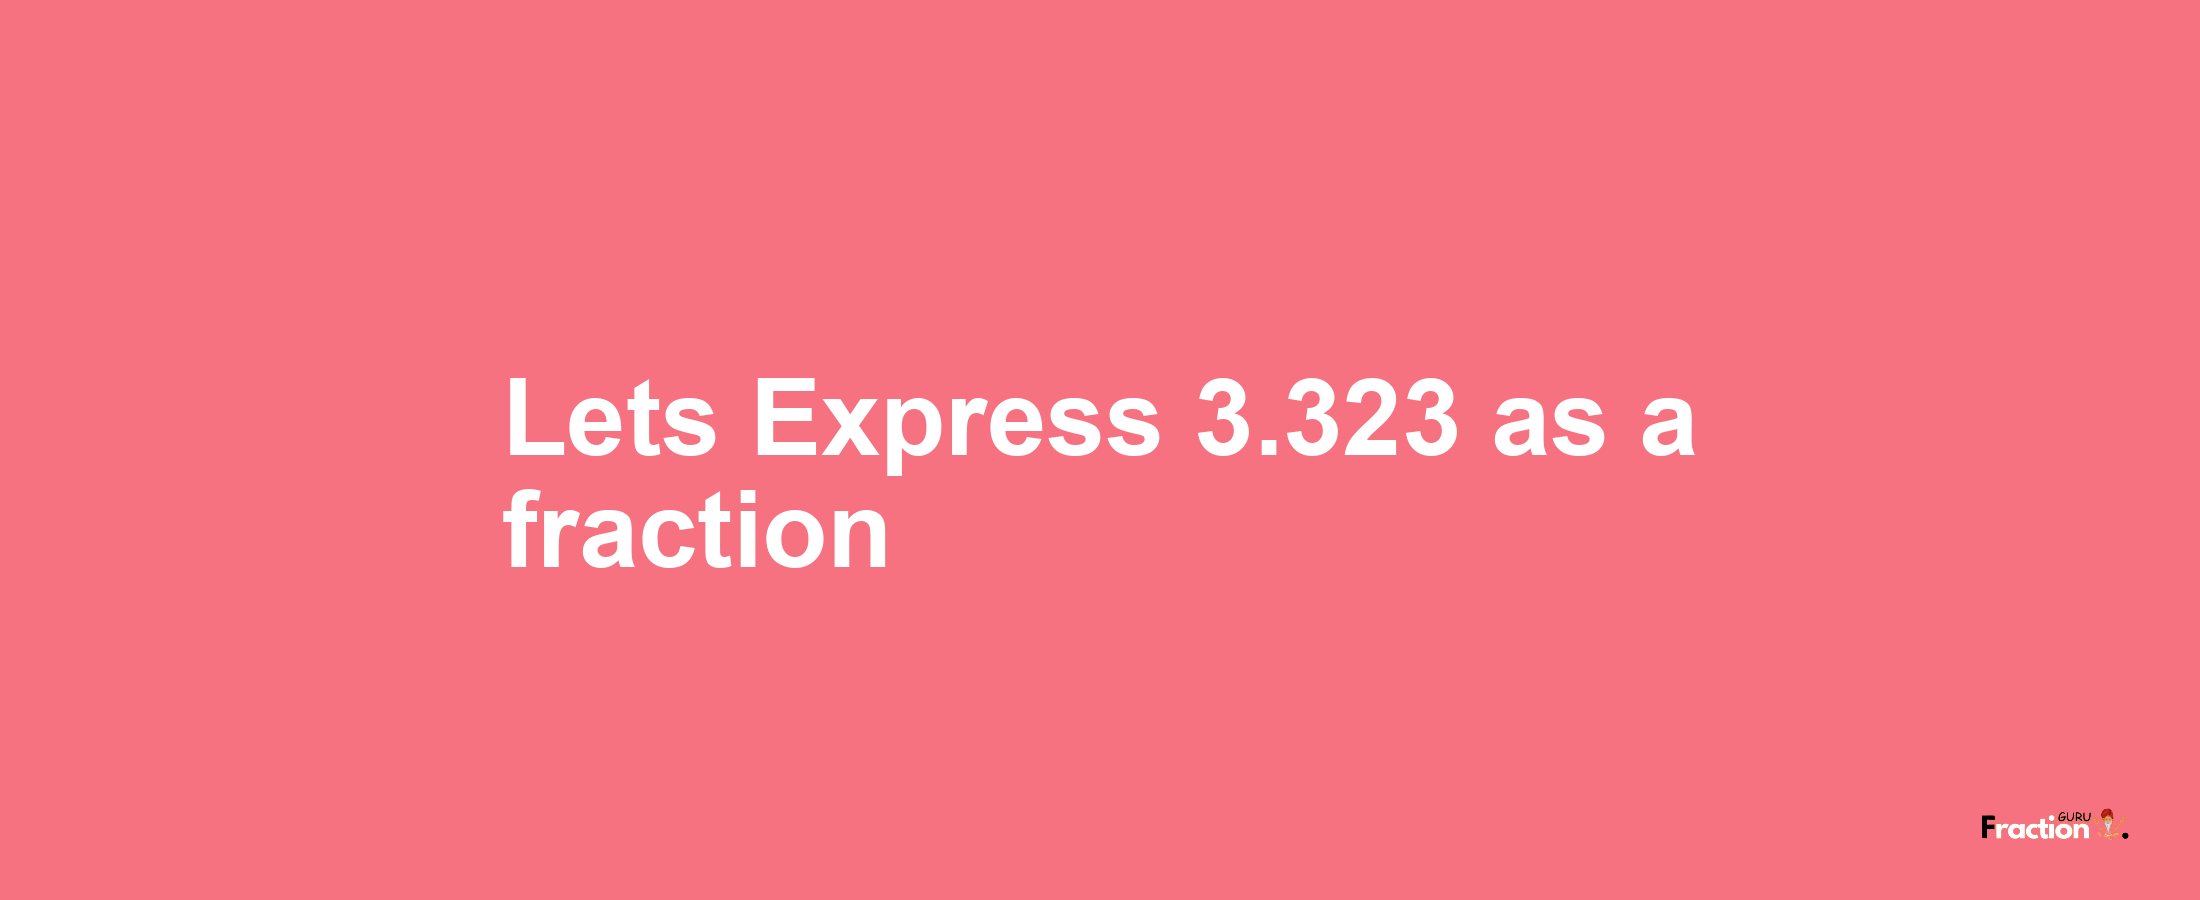 Lets Express 3.323 as afraction